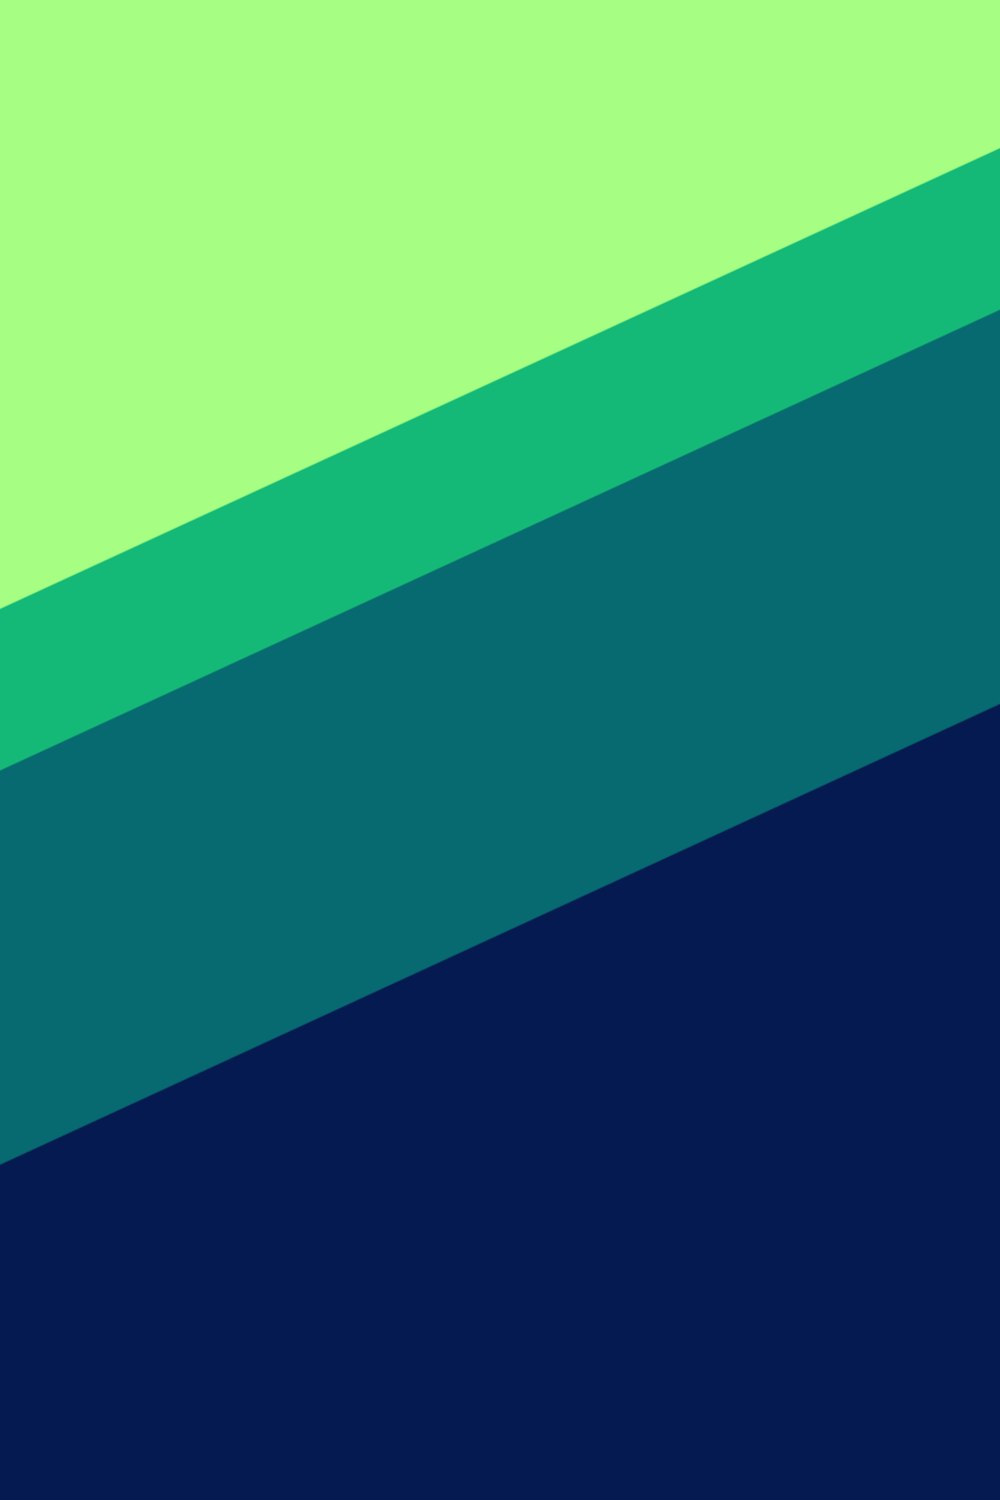 green and blue striped textile